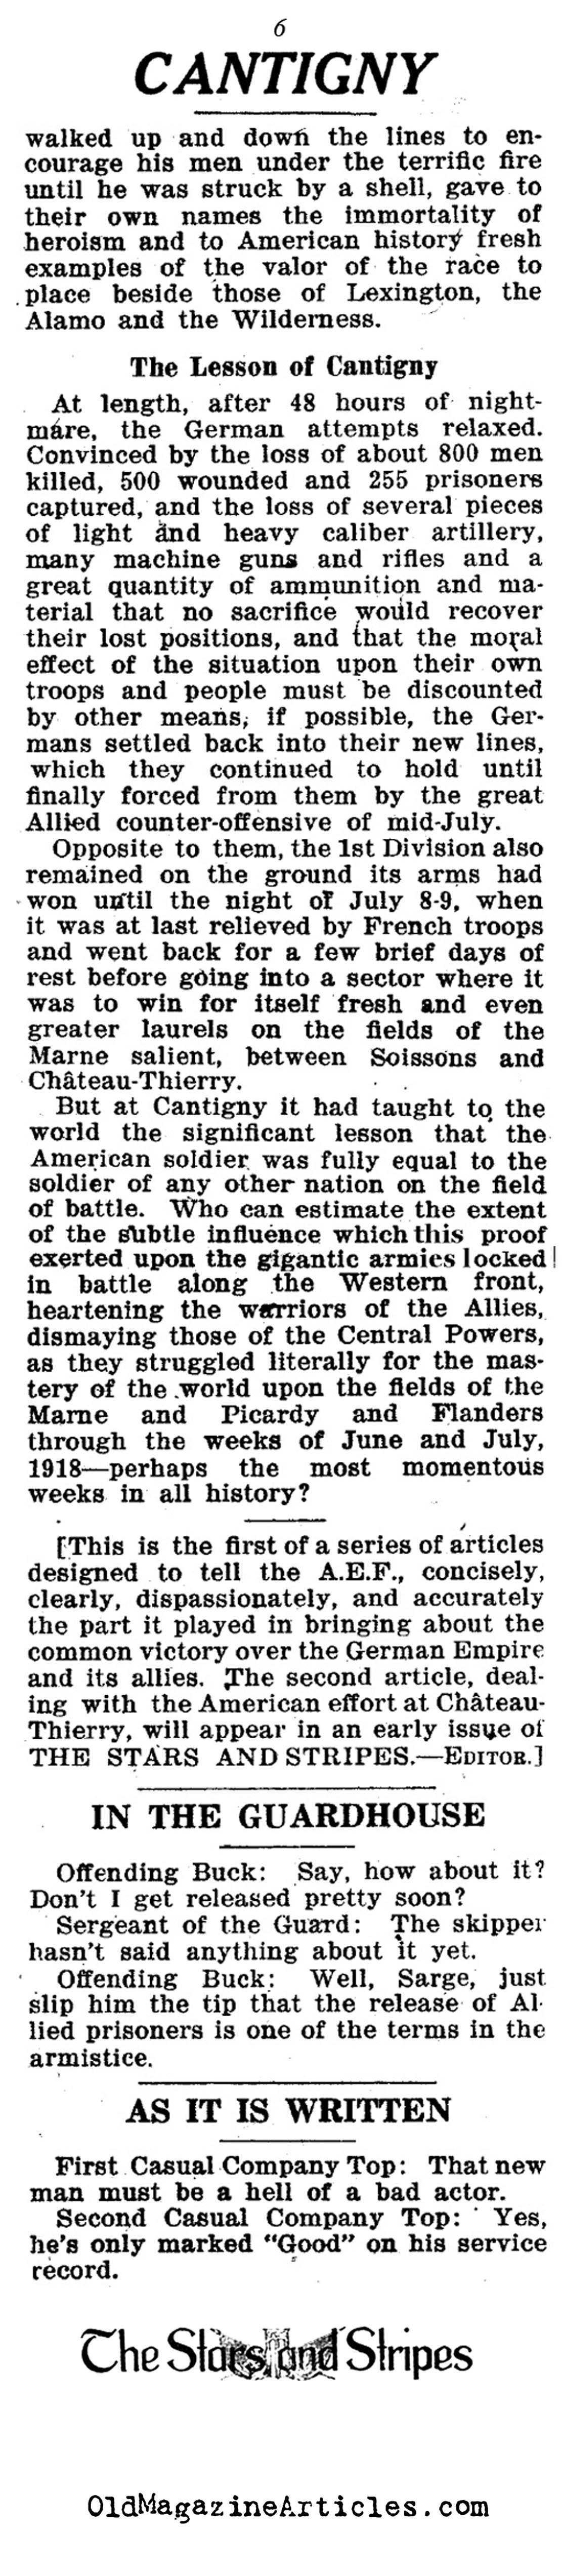 The U.S. First Division at Cantigny (The Stars and Stripes, 1918)